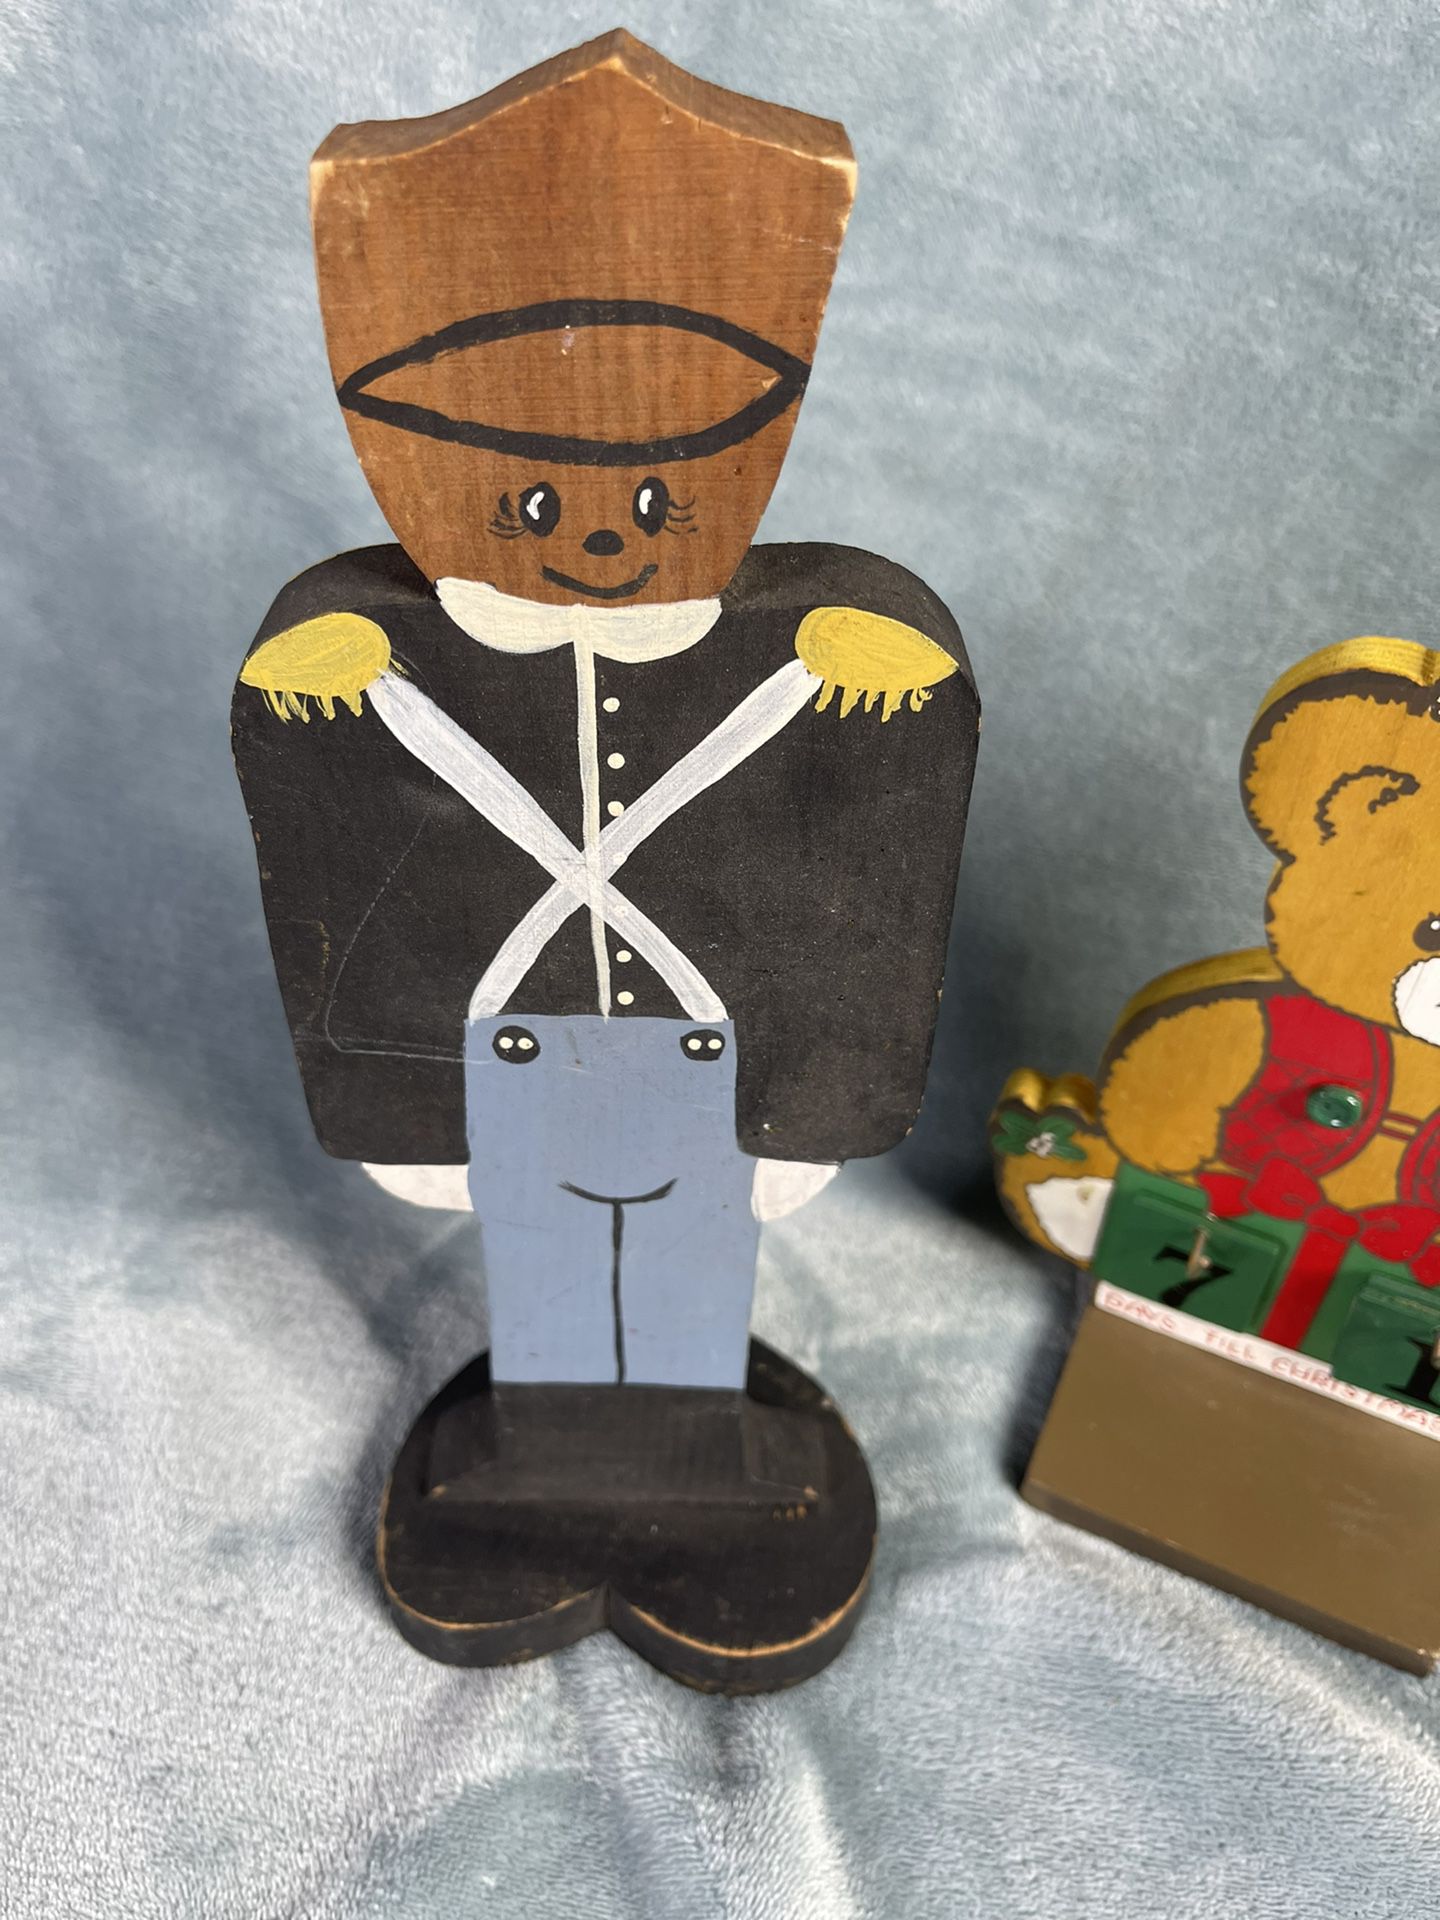 Christmas teddy bear and drummer boy wooden hand painted figurines